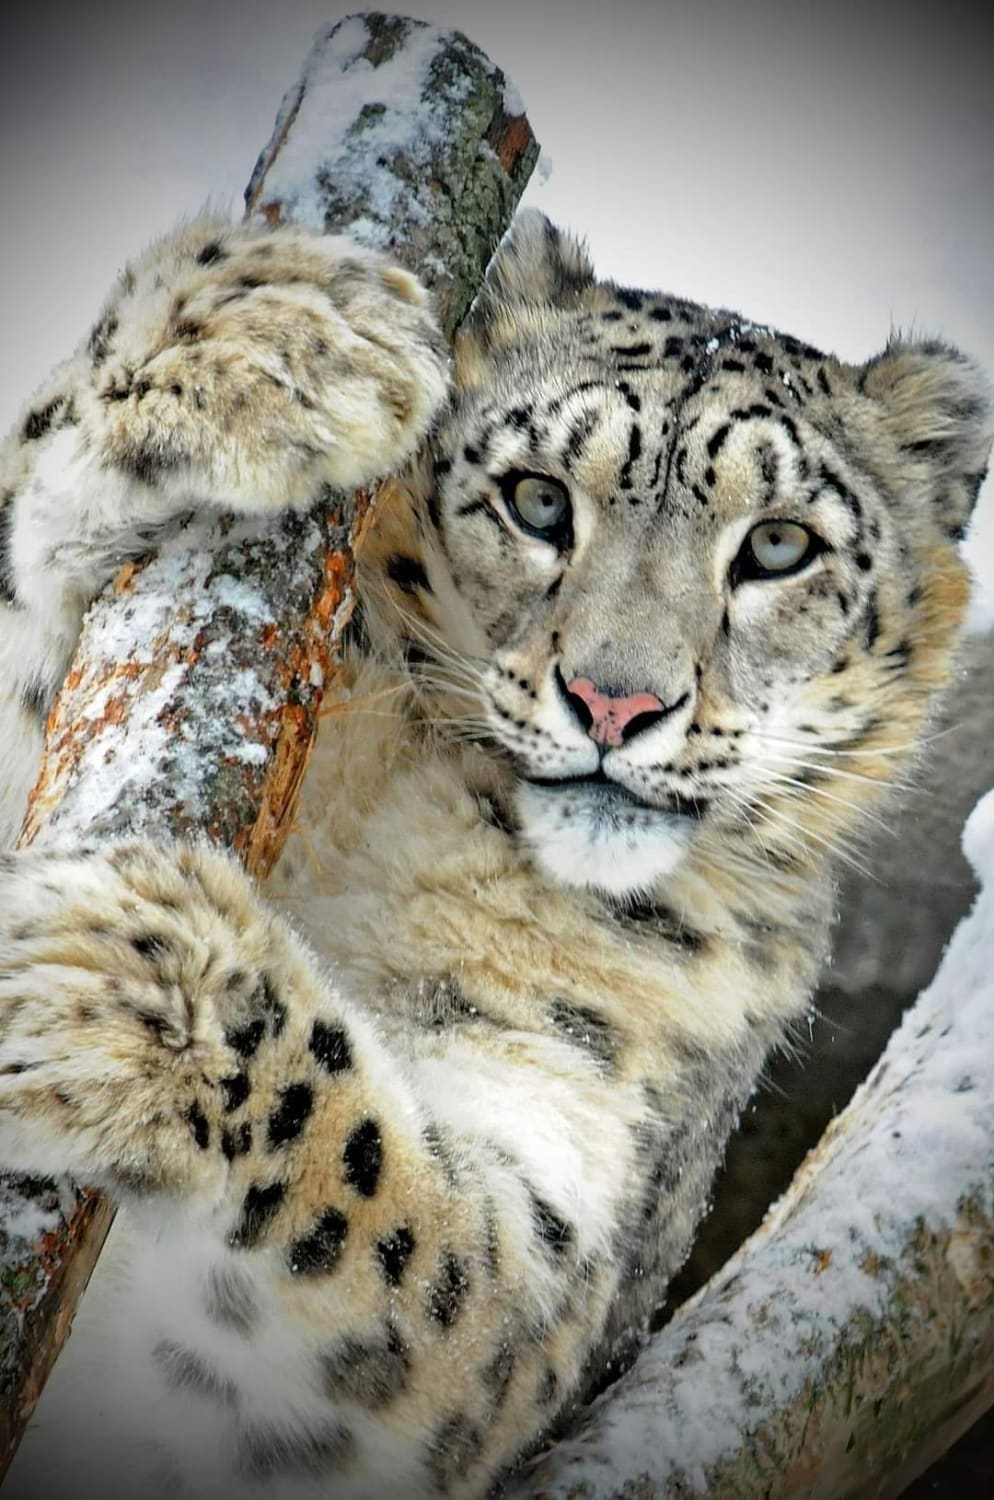 The snow leopard.